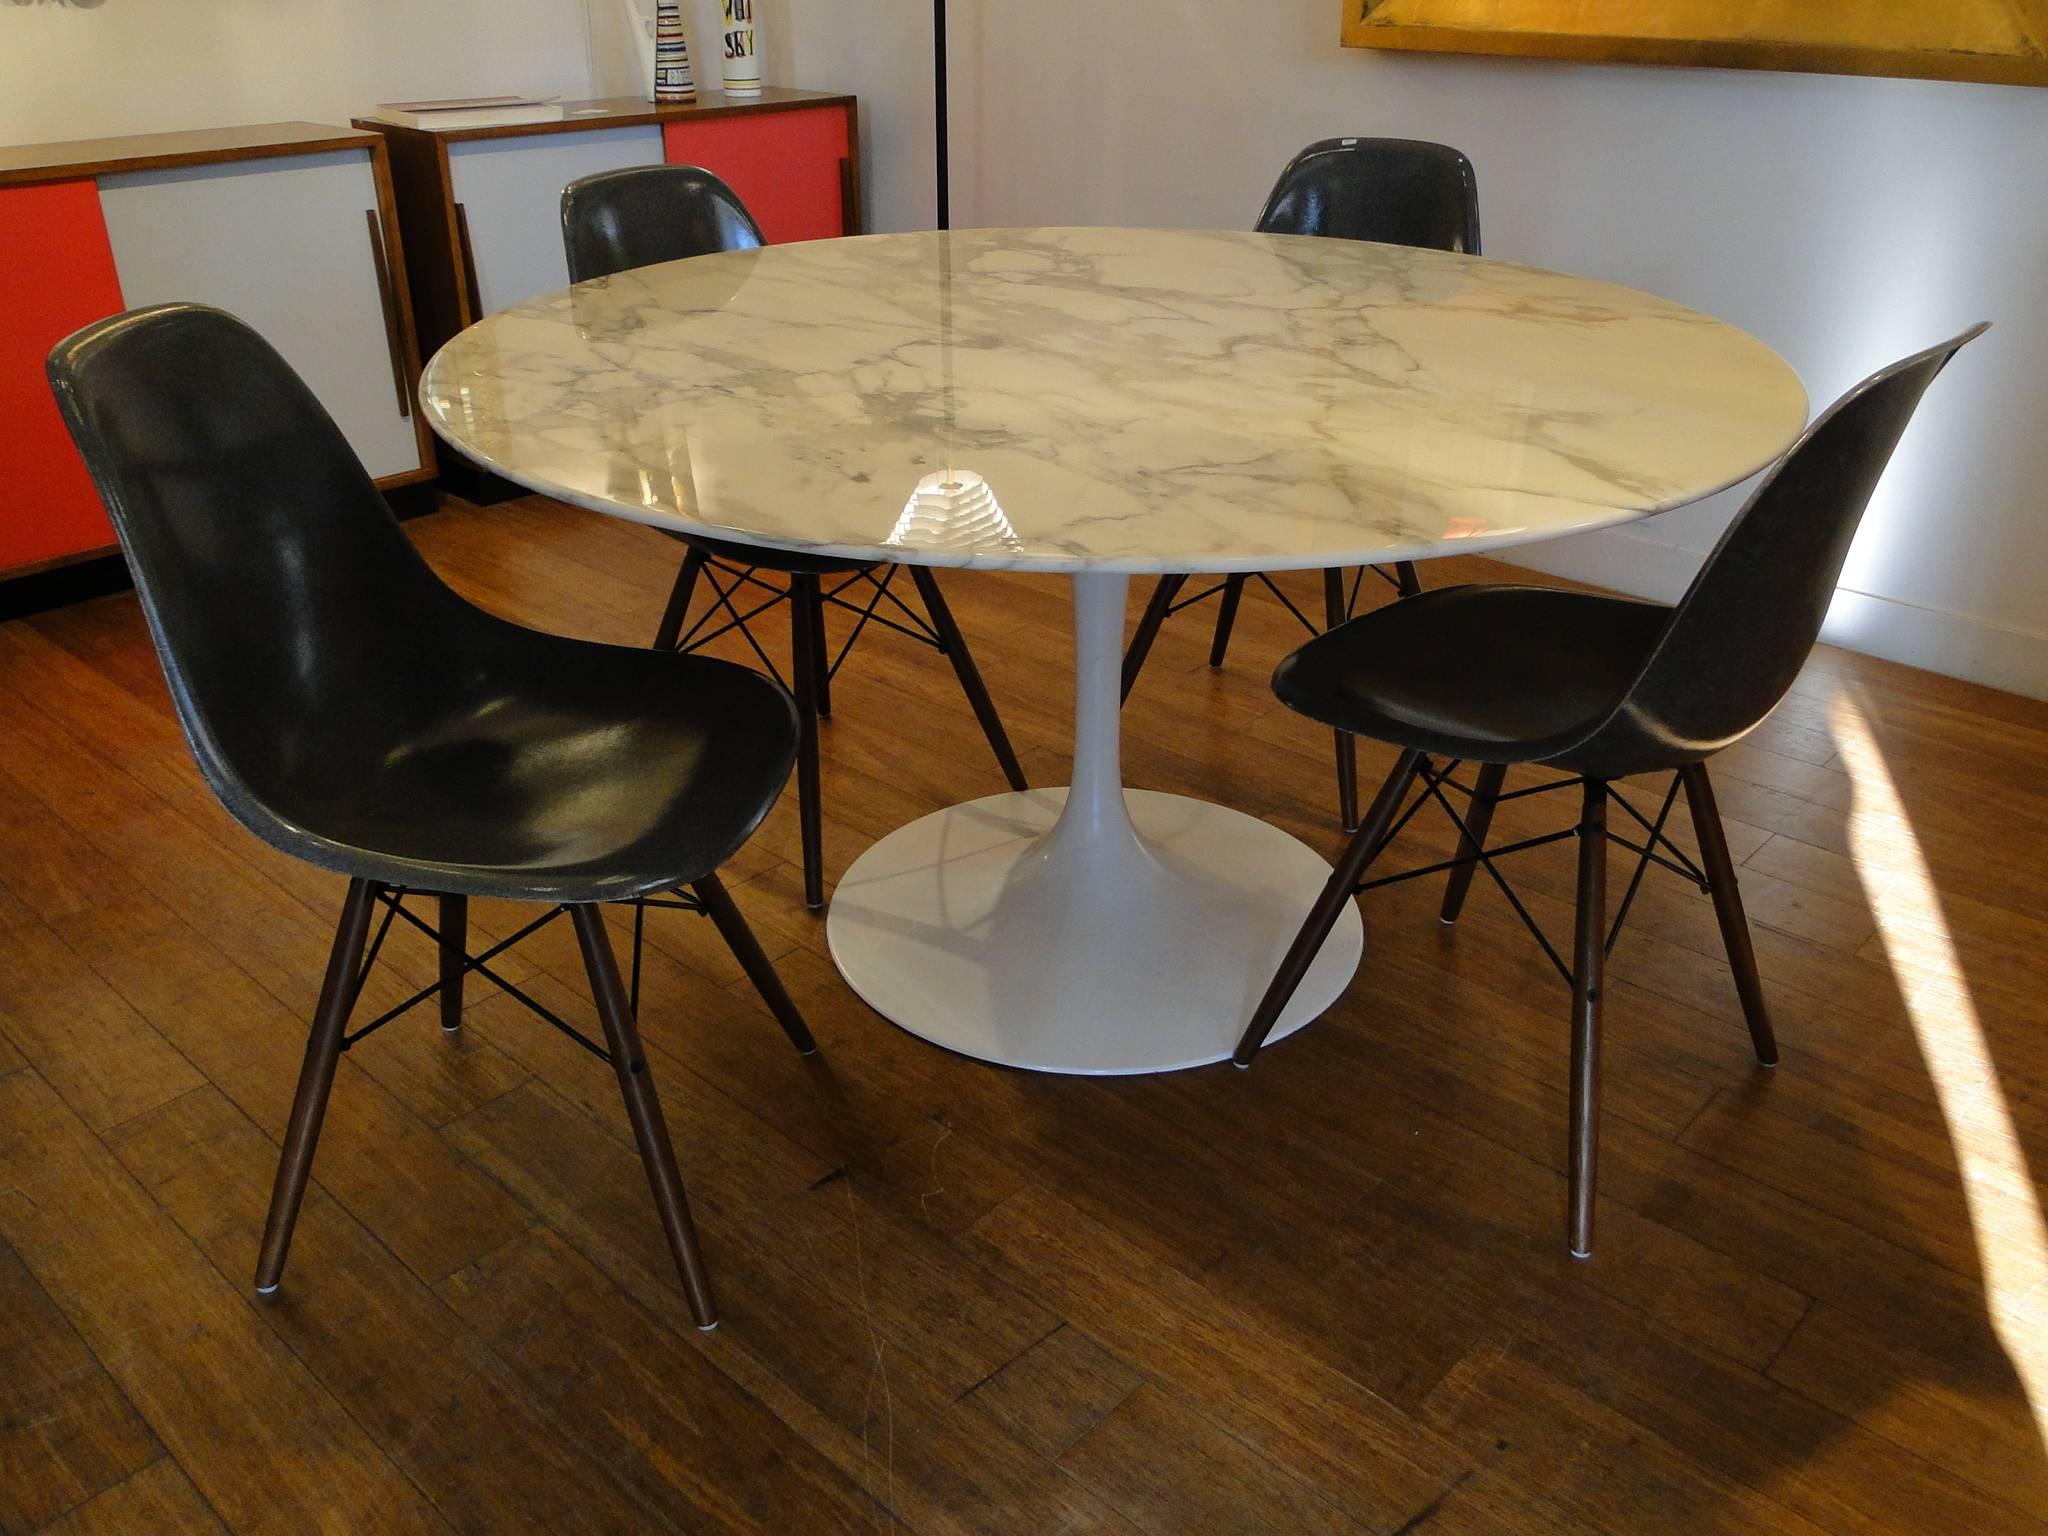 Round tulip based table, designed by Eero Saarinen, (1957), U.S.A. Knoll International.

Tulip base in white (stamped 'Knoll International') with a 137 cm marble top in very light grey. This table dates to the 1970s.
Condition: 

Very good